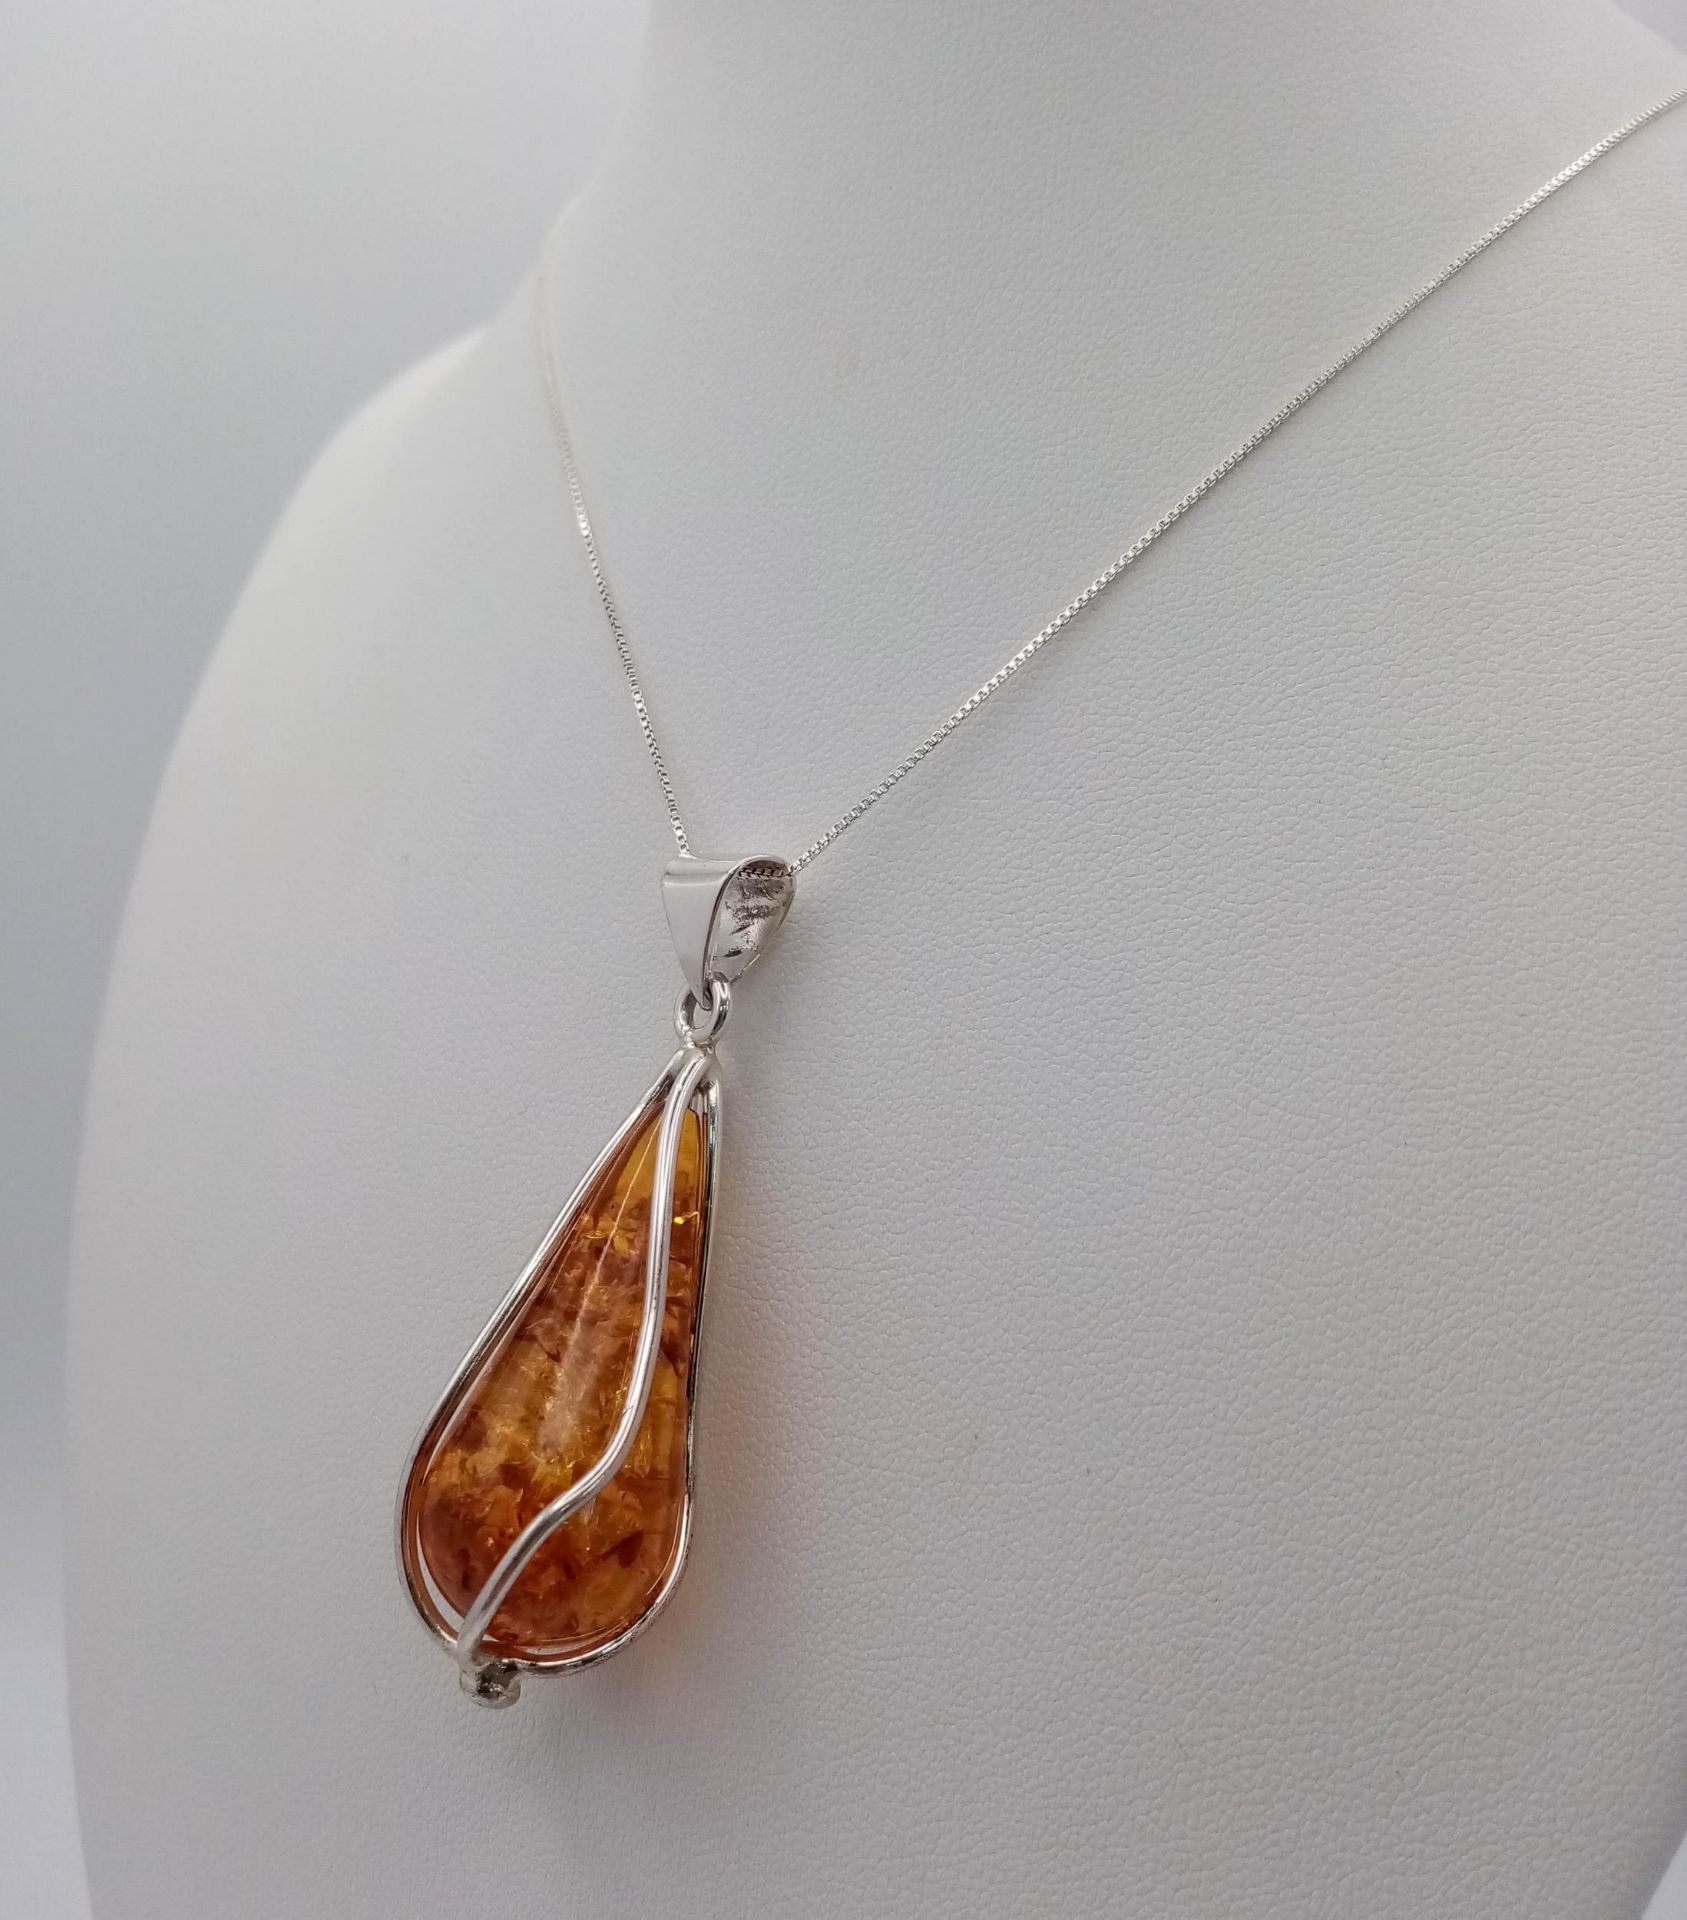 An Unworn, Fully Certified Limited Edition (1 of 50), Sterling Silver and Baltic Cognac Amber - Image 3 of 5